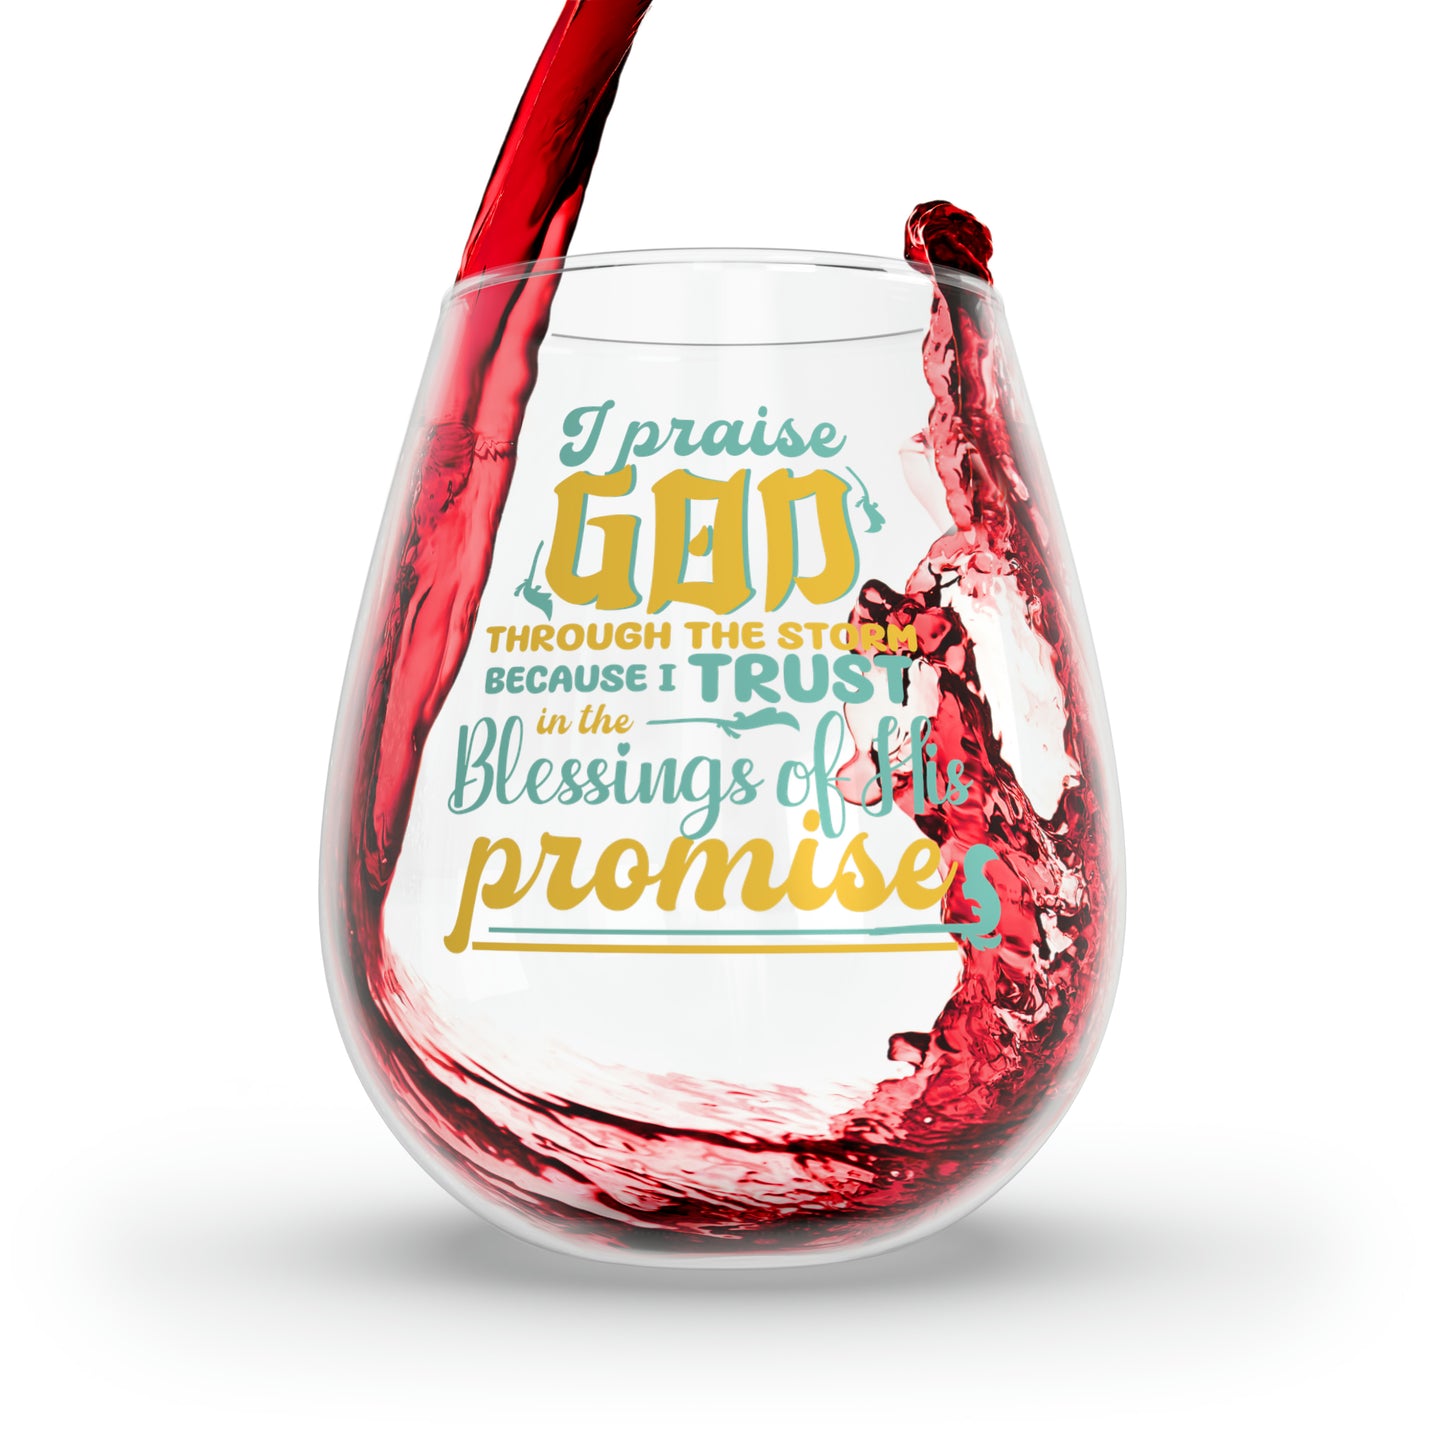 I Praise God Through The Storm Because I Trust In The Blessings Of His Promises Stemless Wine Glass, 11.75oz